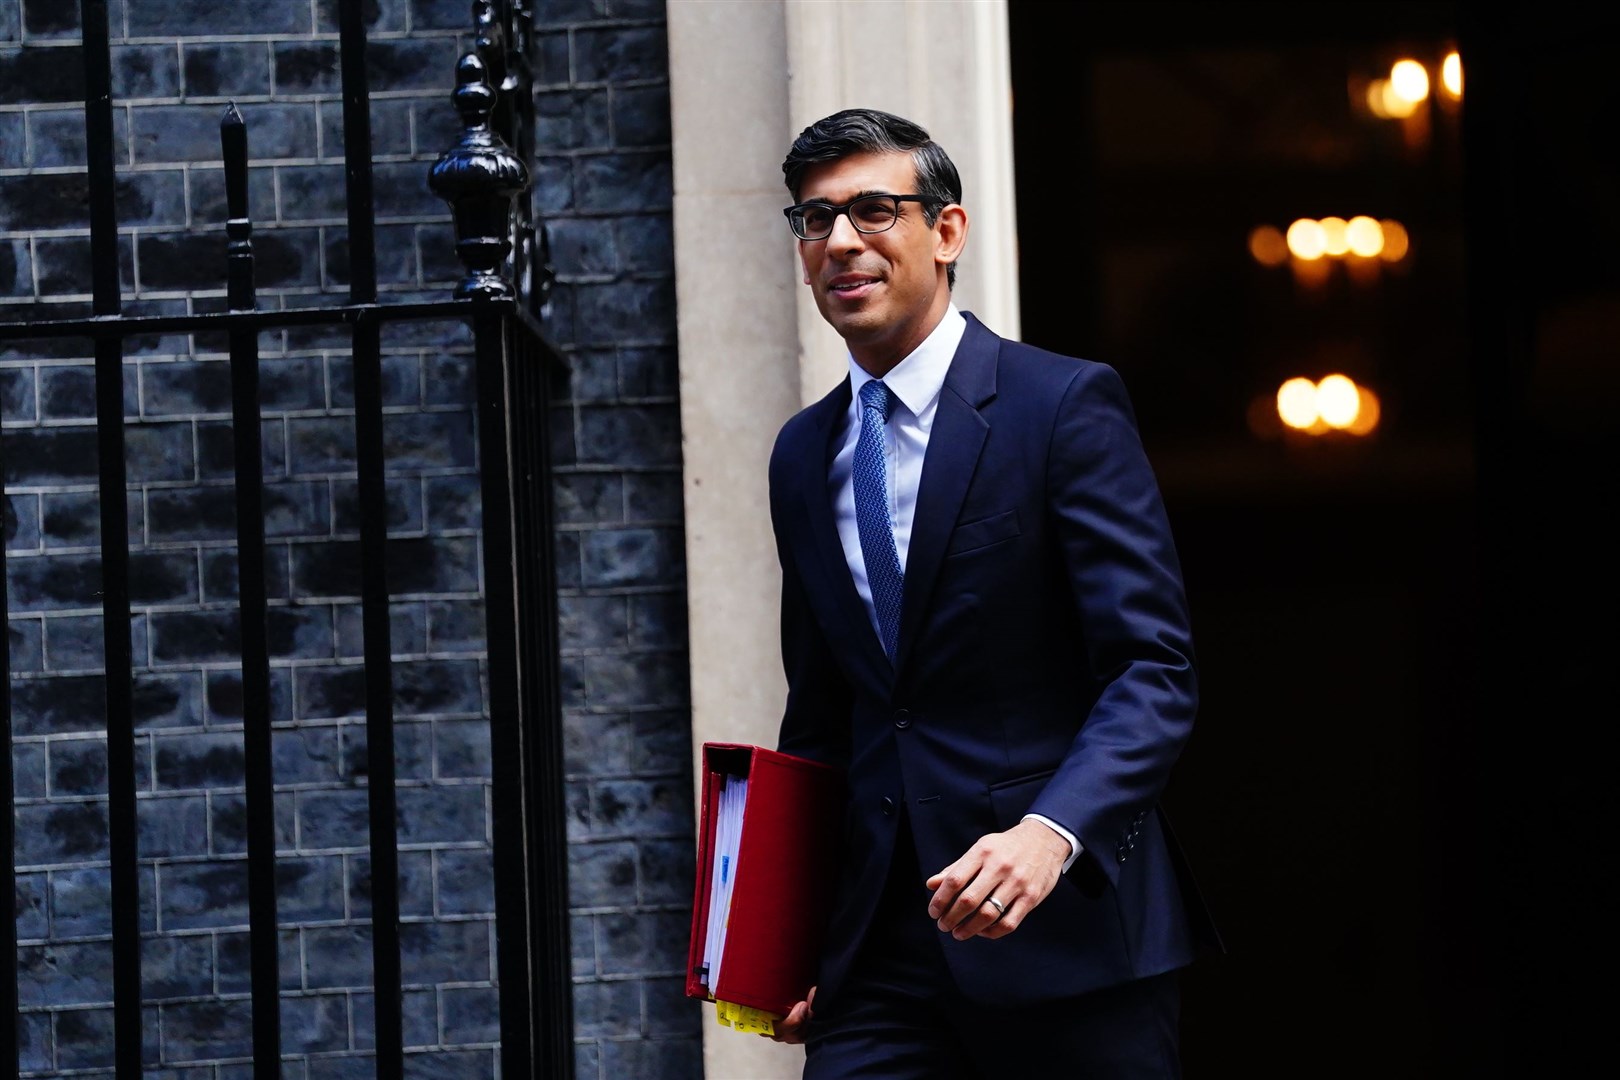 Prime Minister Rishi Sunak departs 10 Downing Street, London, to attend Prime Minister’s Questions at the Houses of Parliament (Victoria Jones/ PA)